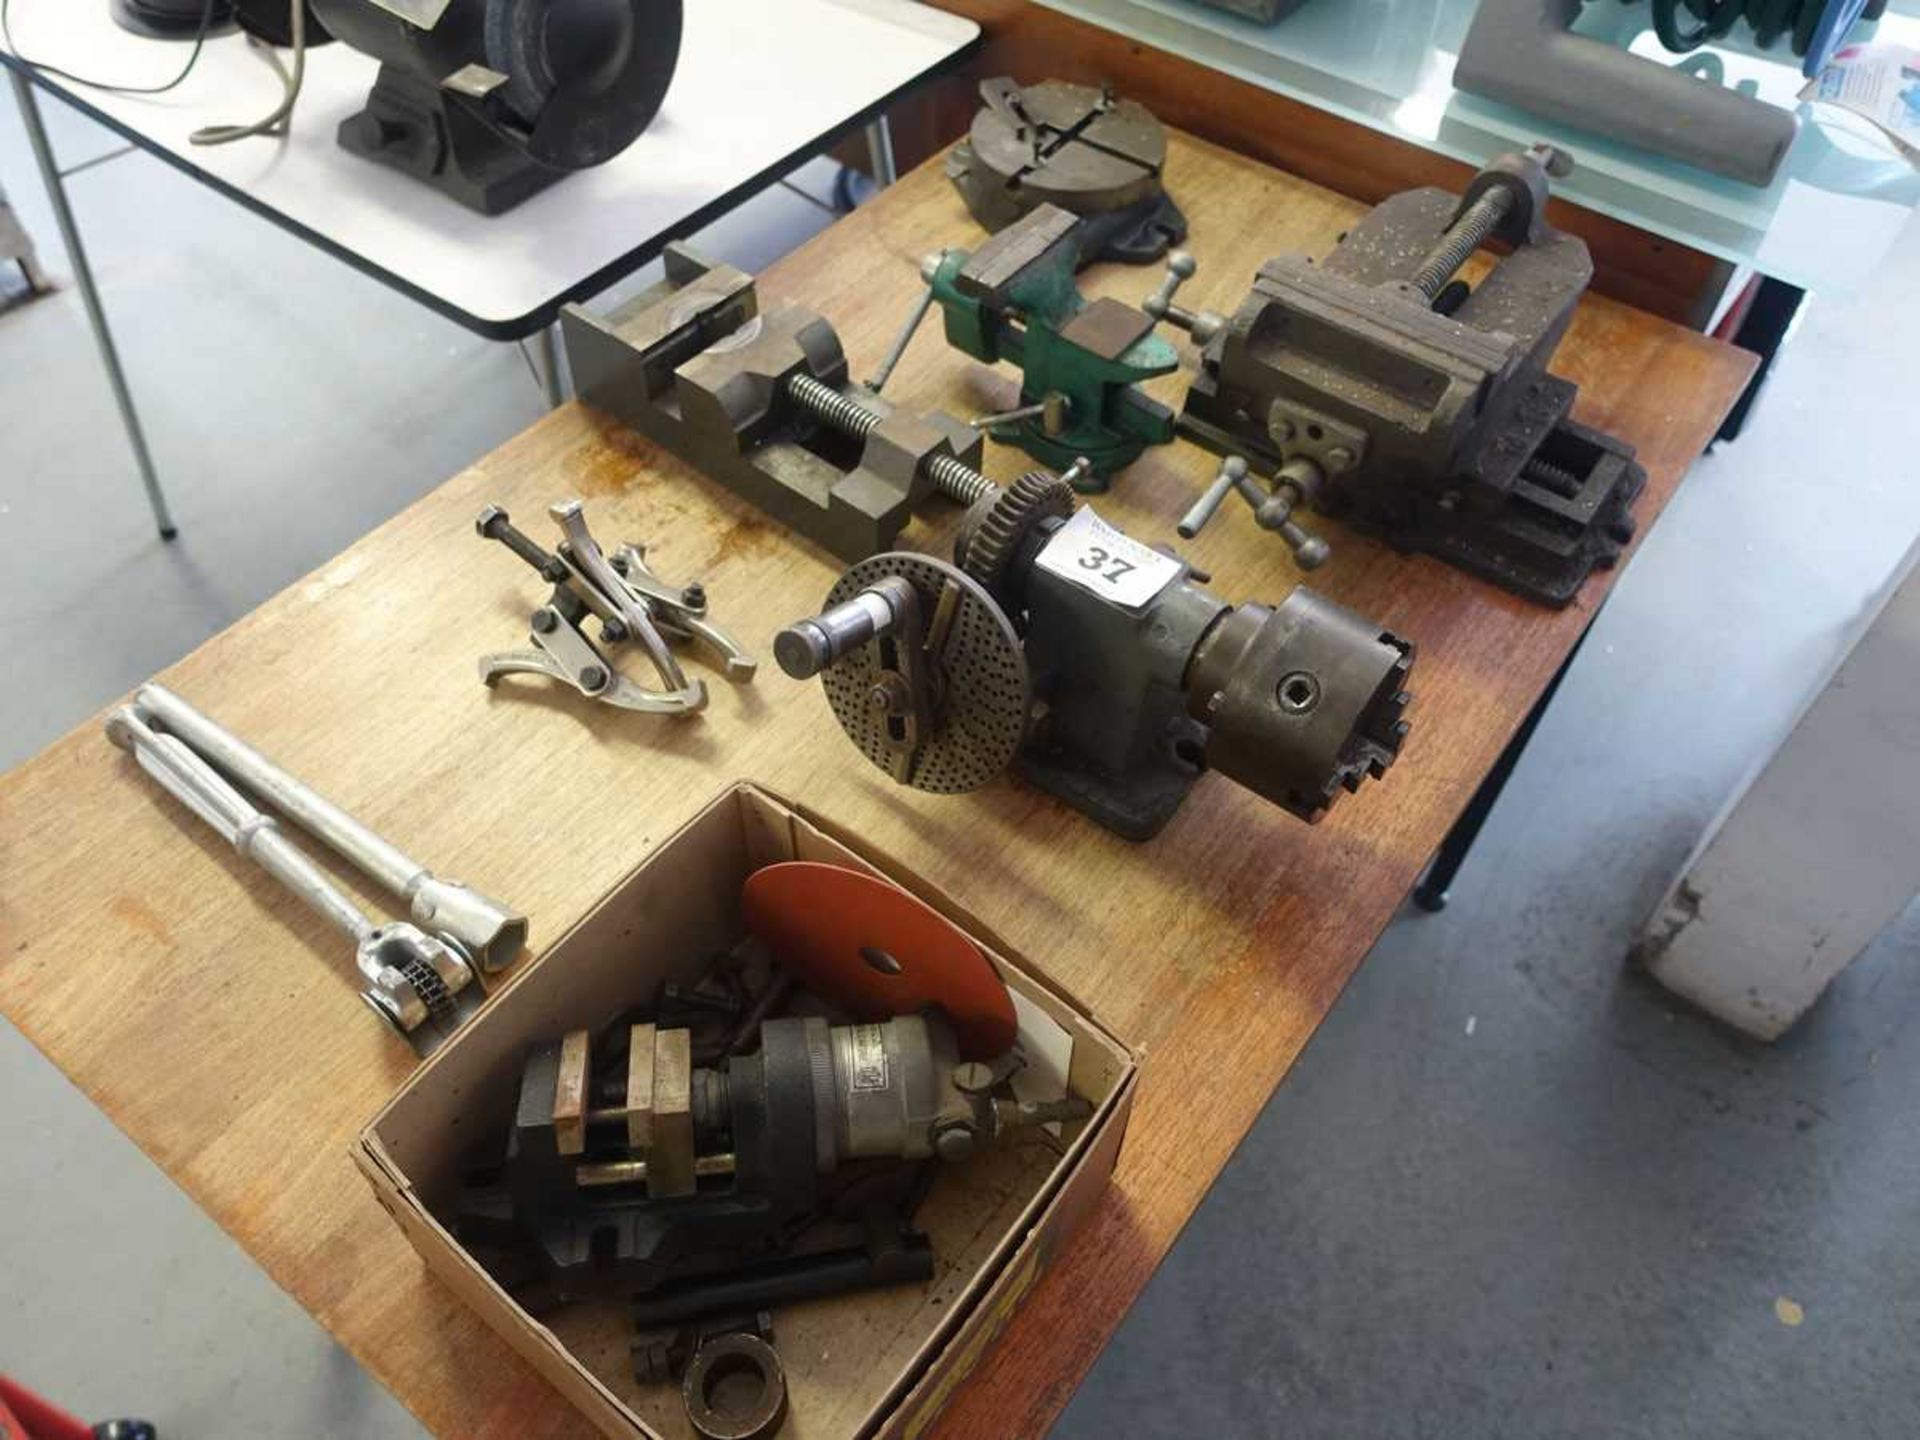 +VAT Four assorted machine vices, dividing head, rotating chuck, bearing puller and knurling tools